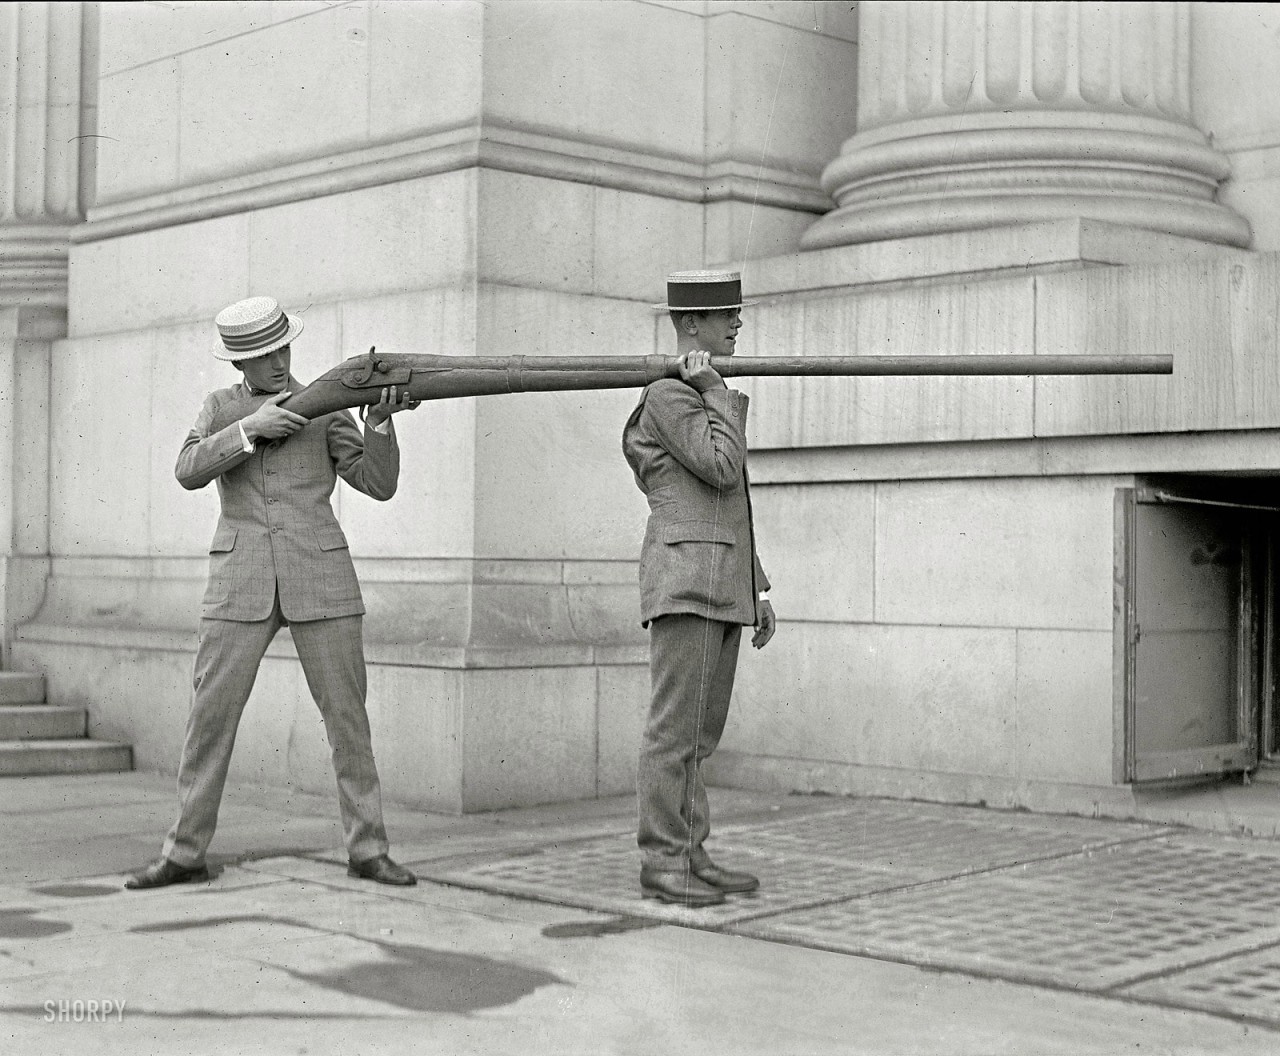 woodmeat:
“ dequalized:
“This is a “Punt Gun”, formerly used for duck hunting and had the potential to kill 50 birds at once. It was banned in the late 1860’s. Photo taken in Washington DC, July 1923.
”
They got that from acme or some shit...